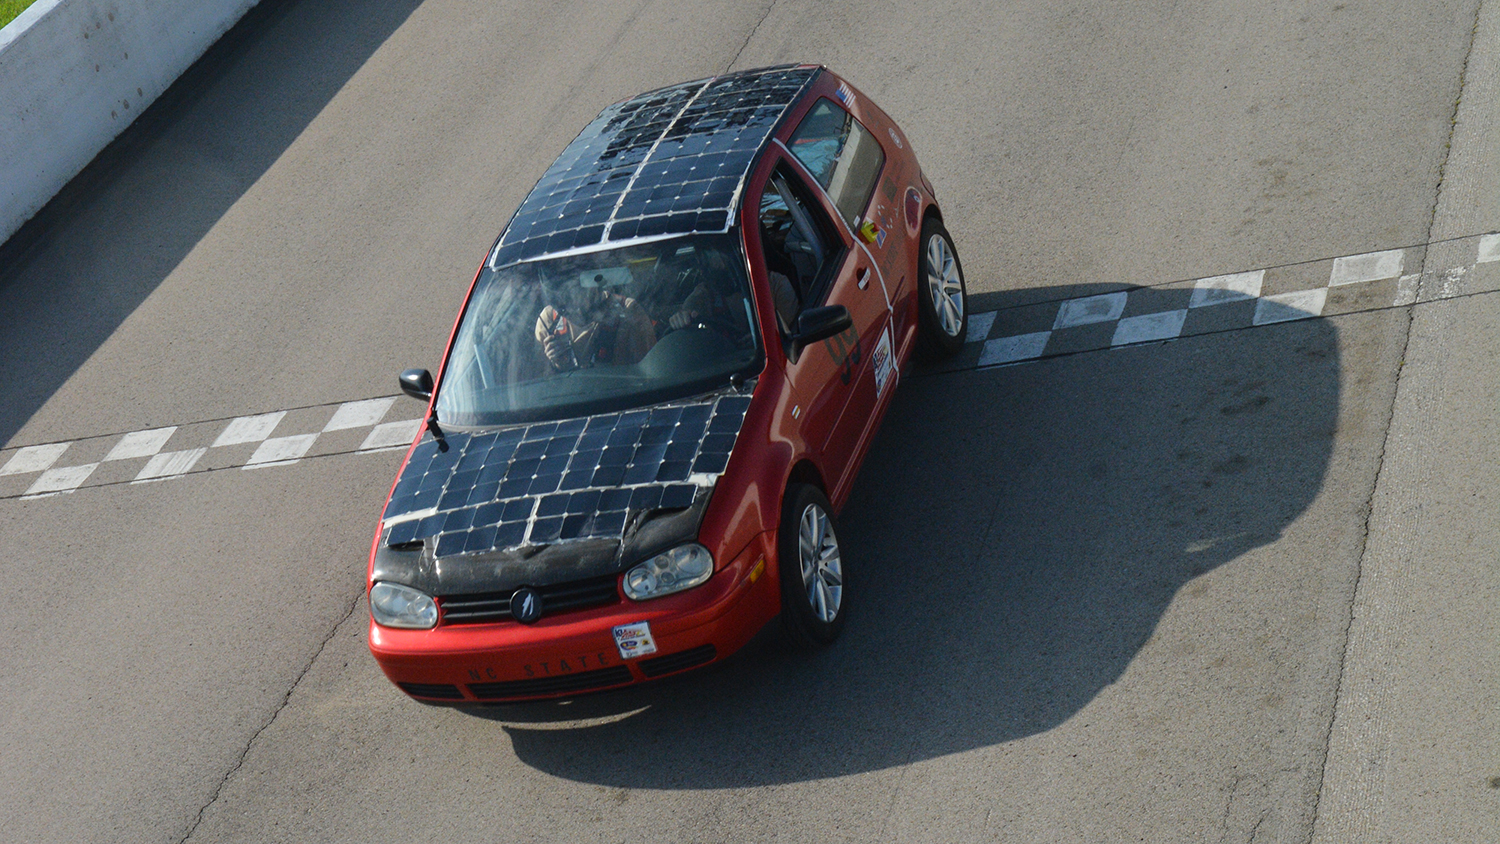 Overhead view of the SolarPack car crossing the finish line.